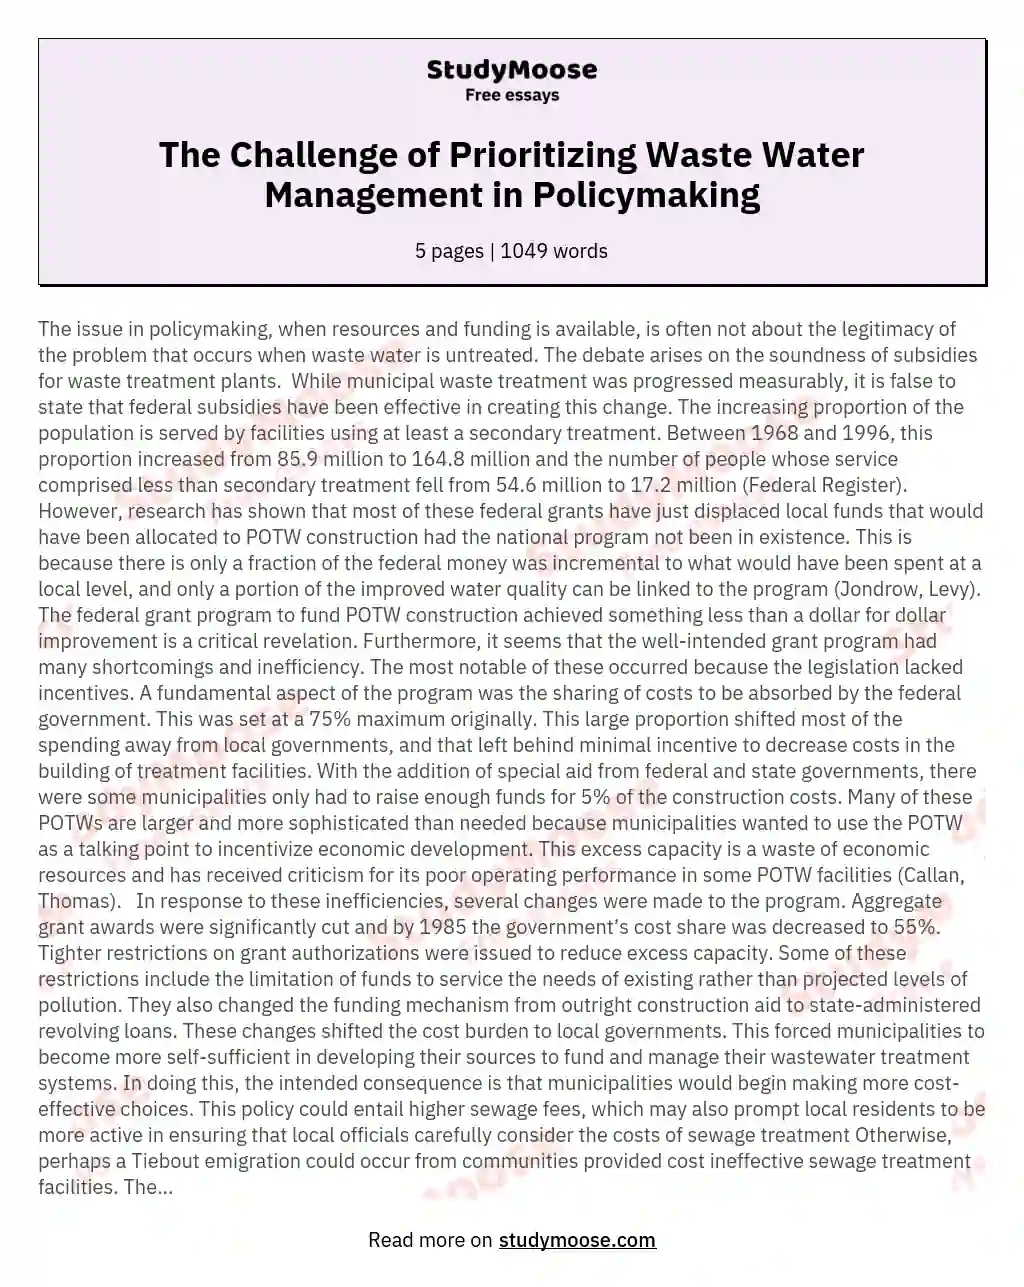 The Challenge of Prioritizing Waste Water Management in Policymaking essay